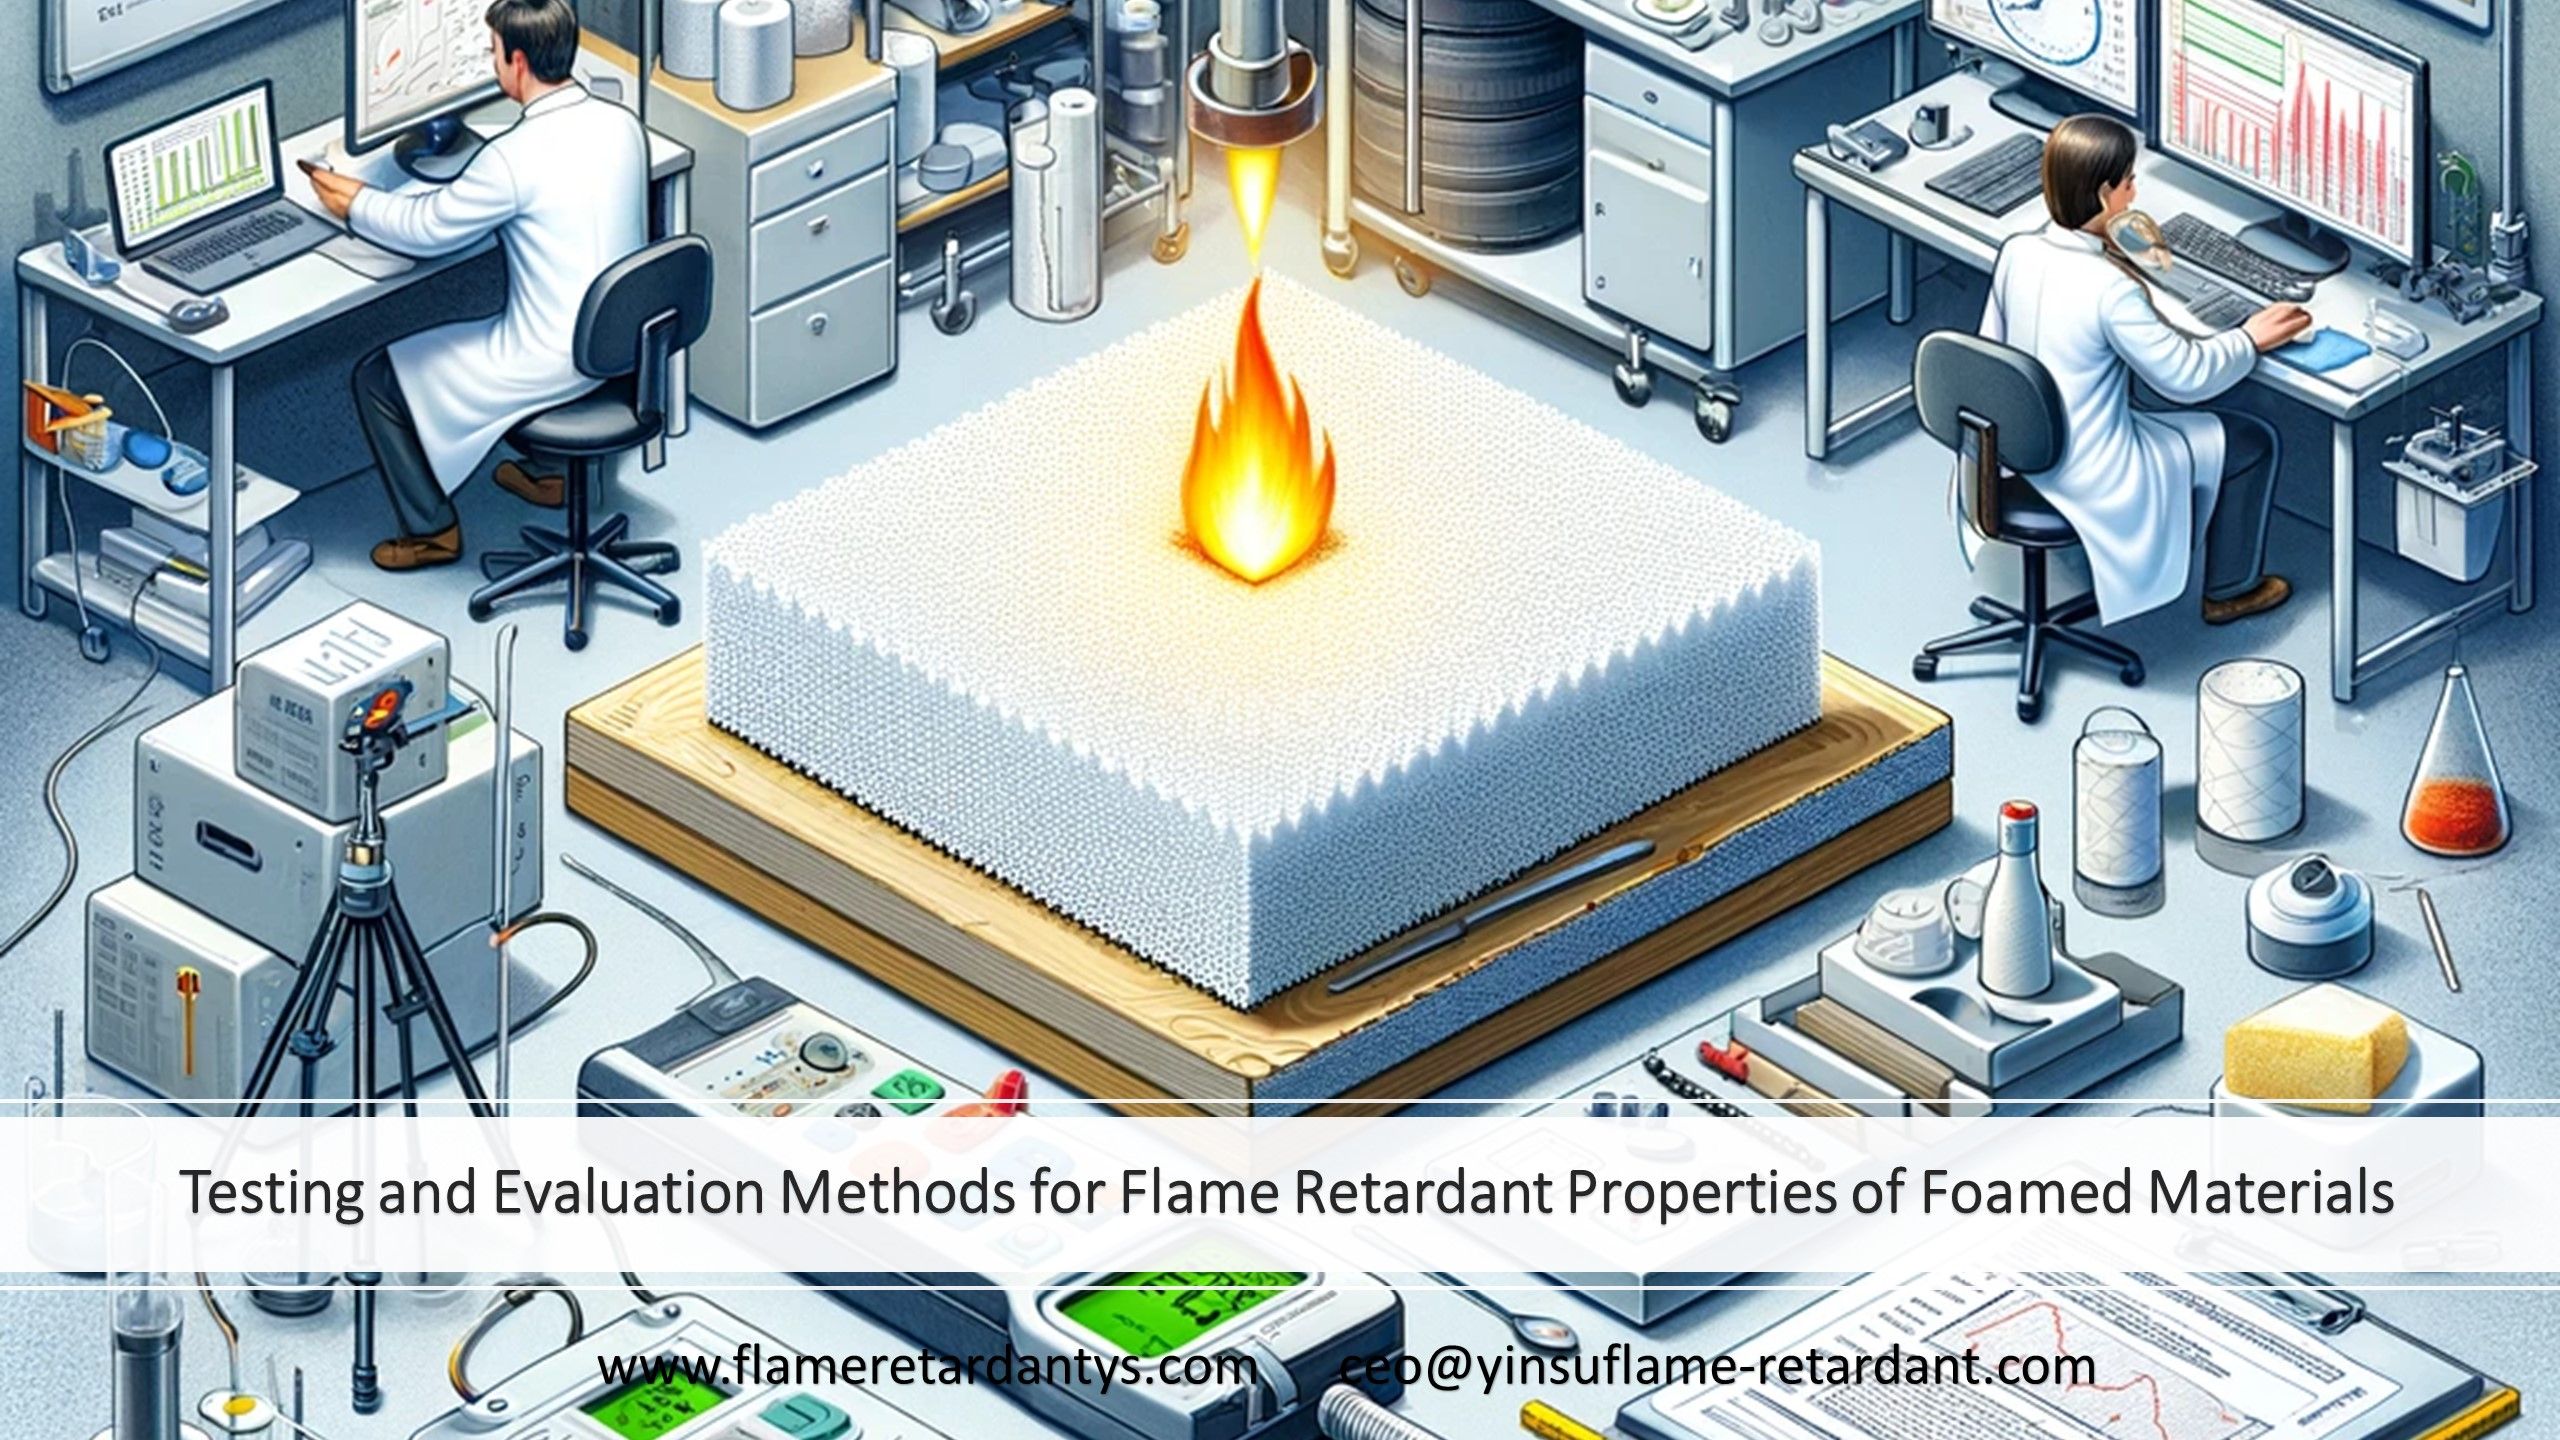 3.4 Testing and Evaluation Methods for Flame Retardant Properties of Foamed Materials